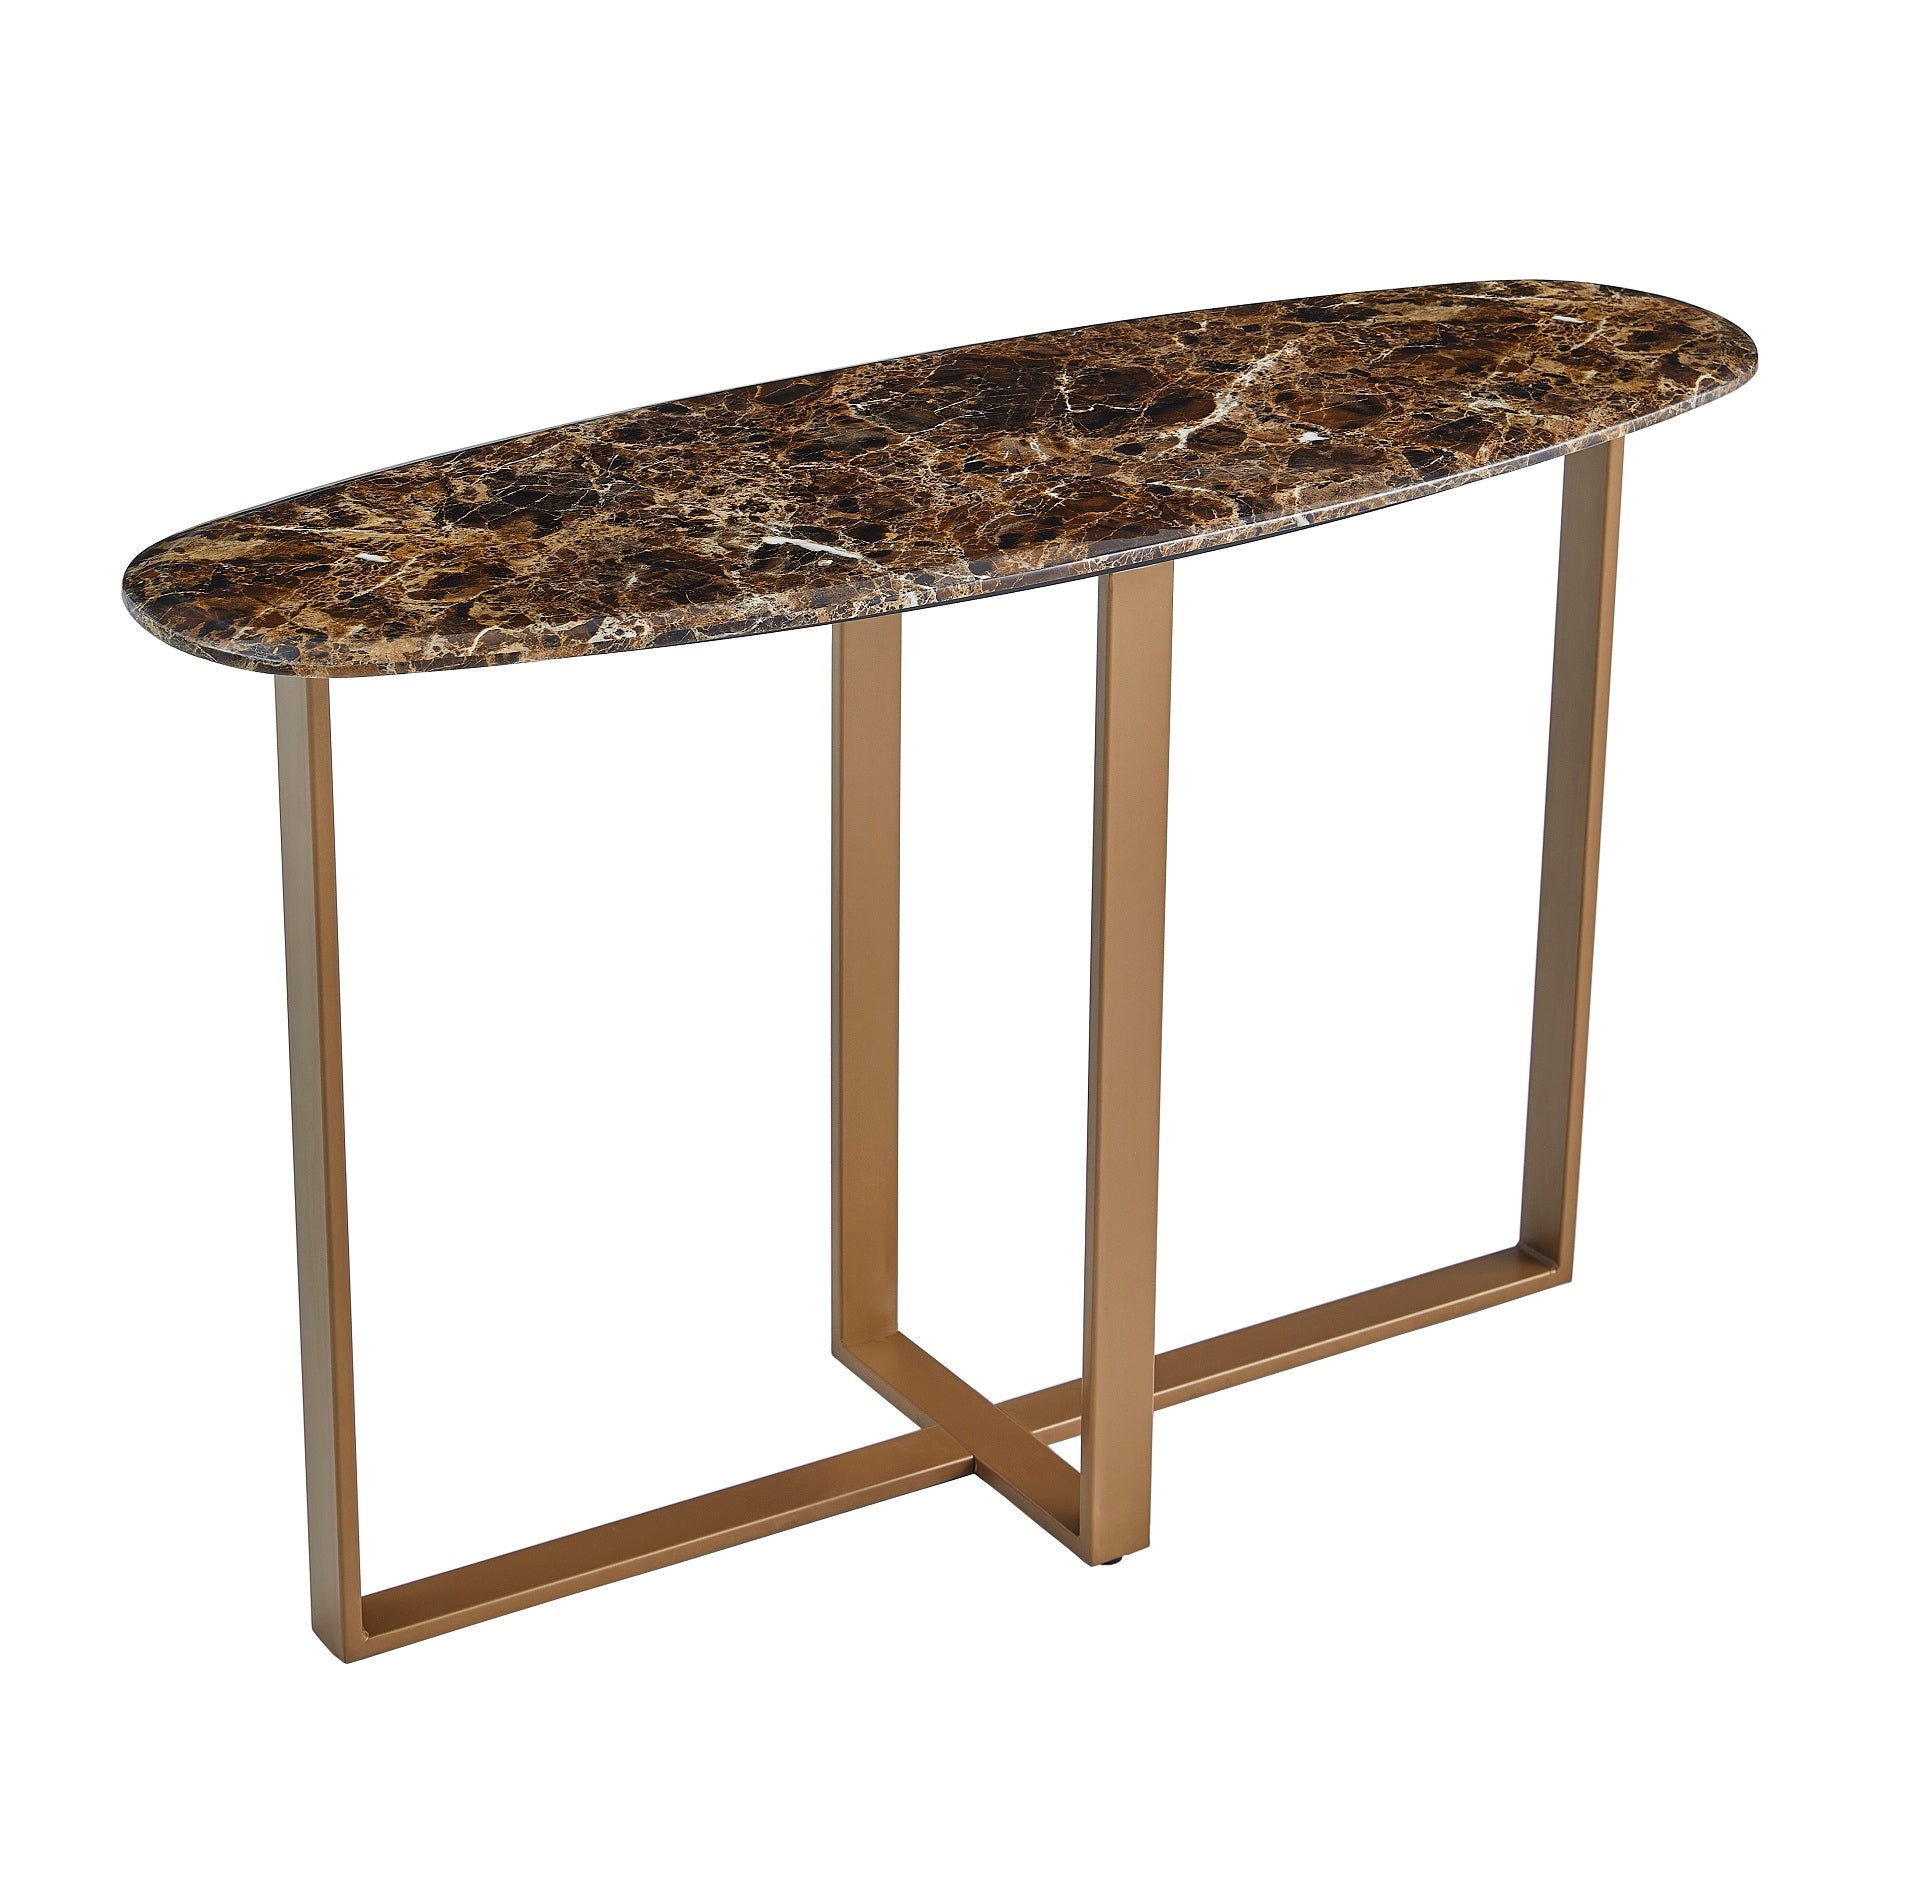 Sorrento Console Table - Sienna Marble Style Top/ Brushed Brass Leg